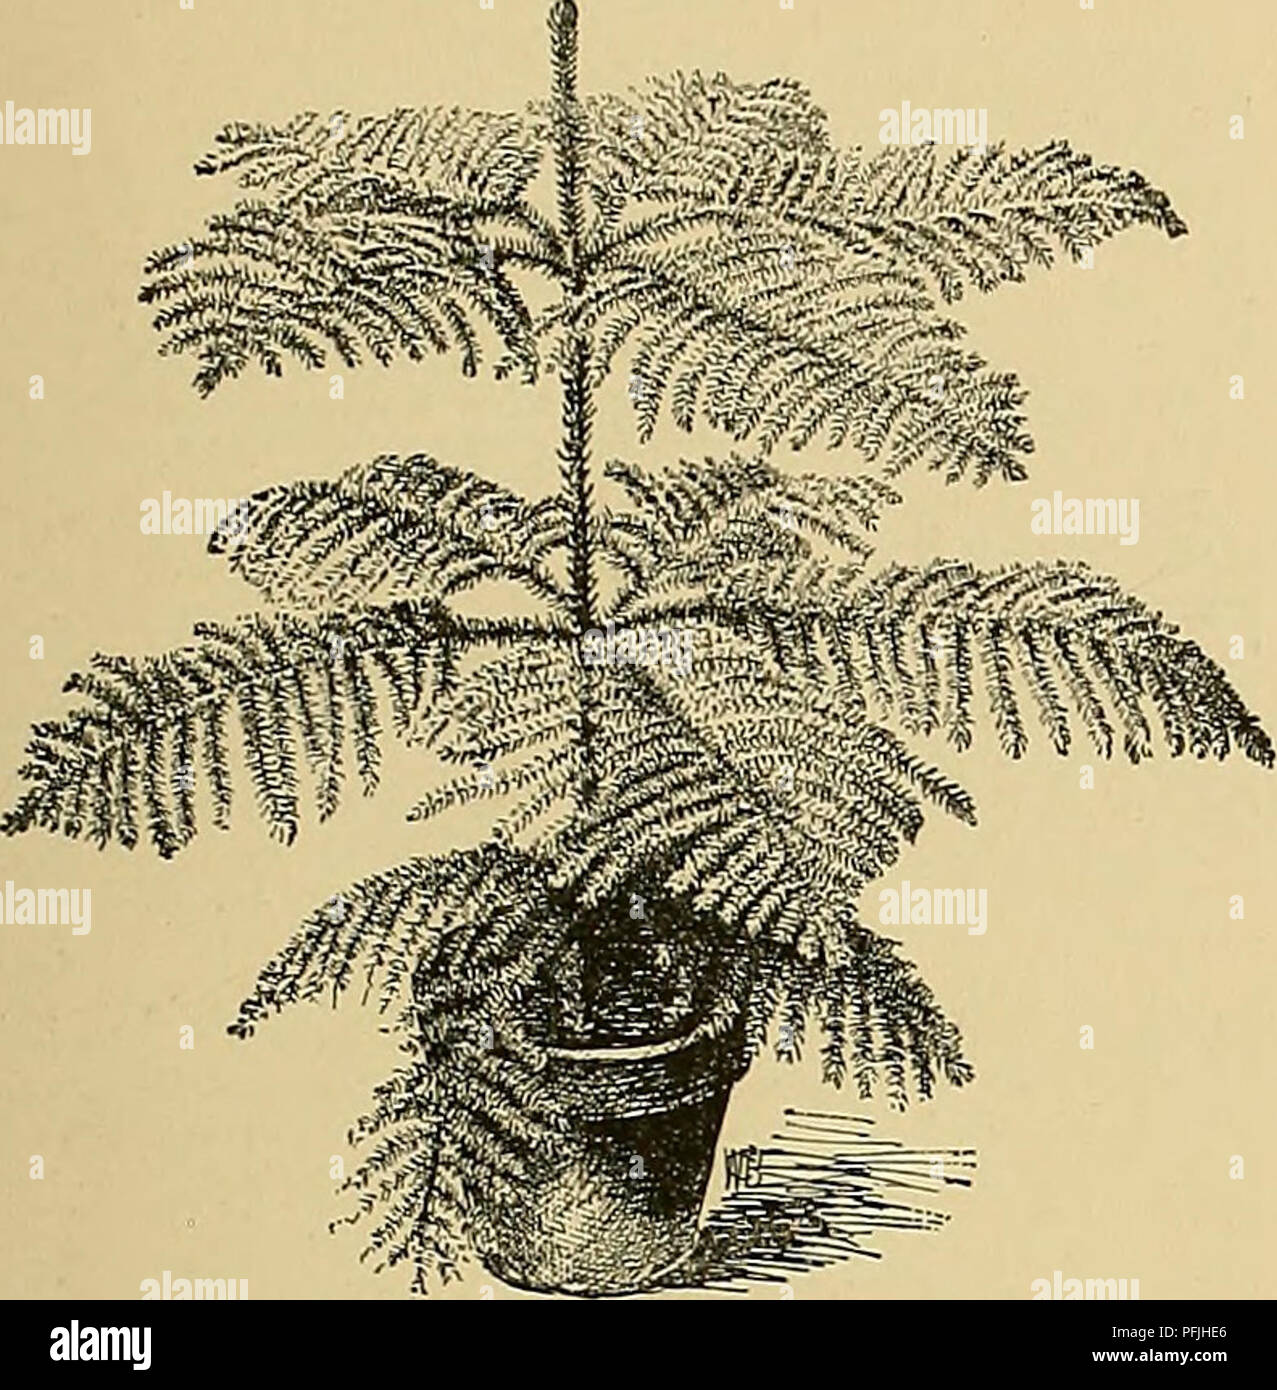 . Cyclopedia of American horticulture, comprising suggestions for cultivation of horticultural plants, descriptions of the species of fruits, vegetables, flowers, and ornamental plants sold in the United States and Canada, together with geographical and biographical sketches. Gardening. ARAUCARIA ARAUCARIA 89 series, of which there are over 700 in that one city. The trade of the world has been supplied for many years from Ghent. Some of the large English growers have. 130. Good specimen of Araucaria excelsa. begun to grow them in considerable quantities in the past five years, but it is likely Stock Photo